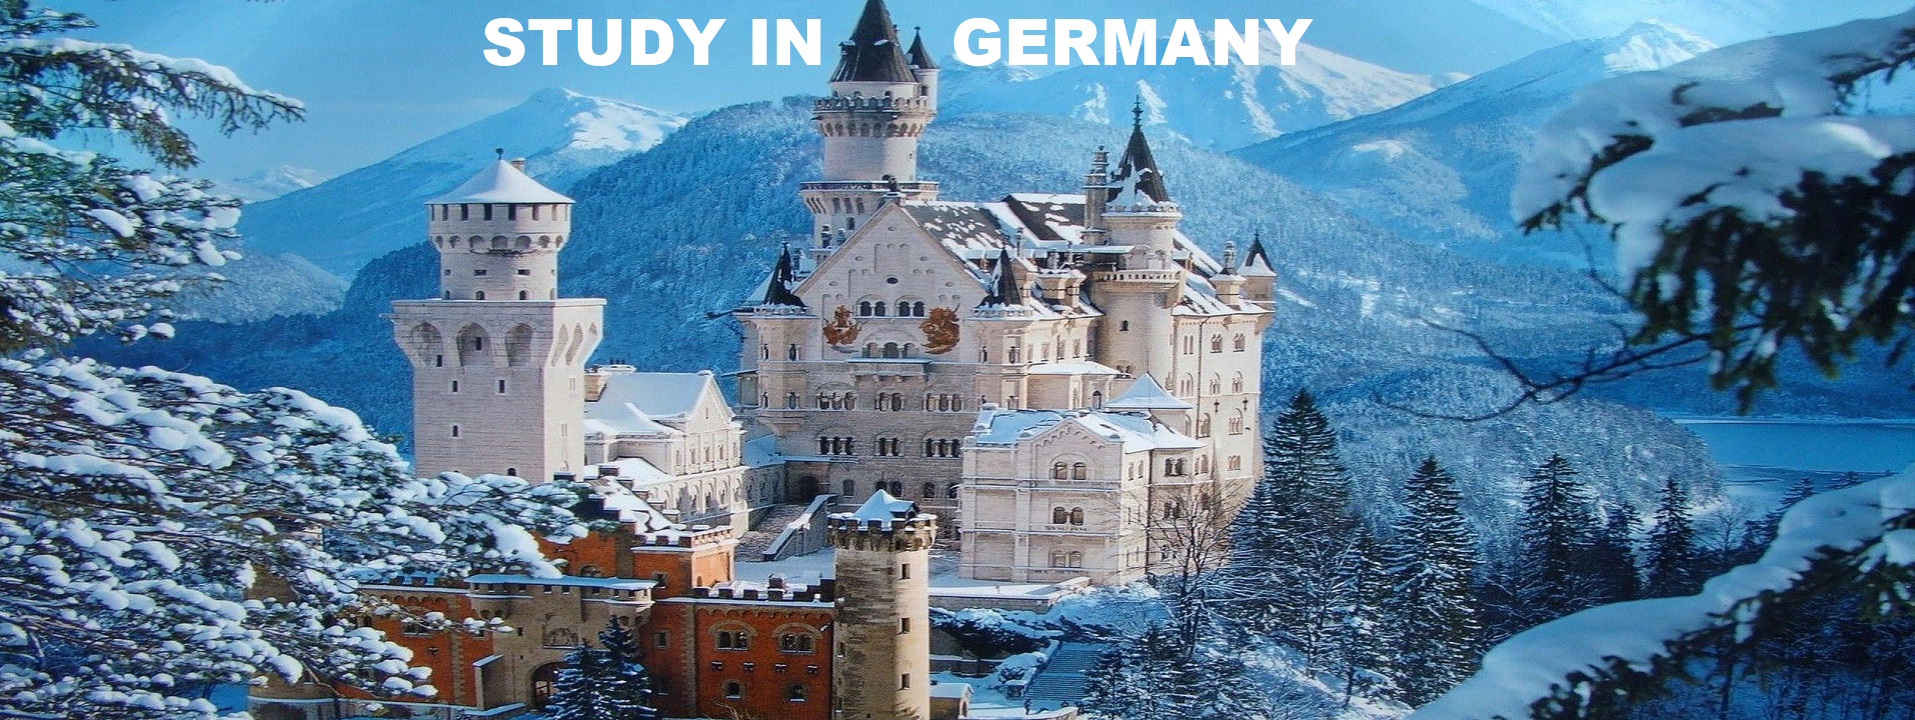 Masters study Germany | Study Master Degree Germany | Student Visa Germany | Cost to Study in Germany | Education immigration Consultants Germany | study in Germany for Indian students | Cost to Study in Germany | study in Germany requirements | study masters in Germany | Study a Master Degree in Germany